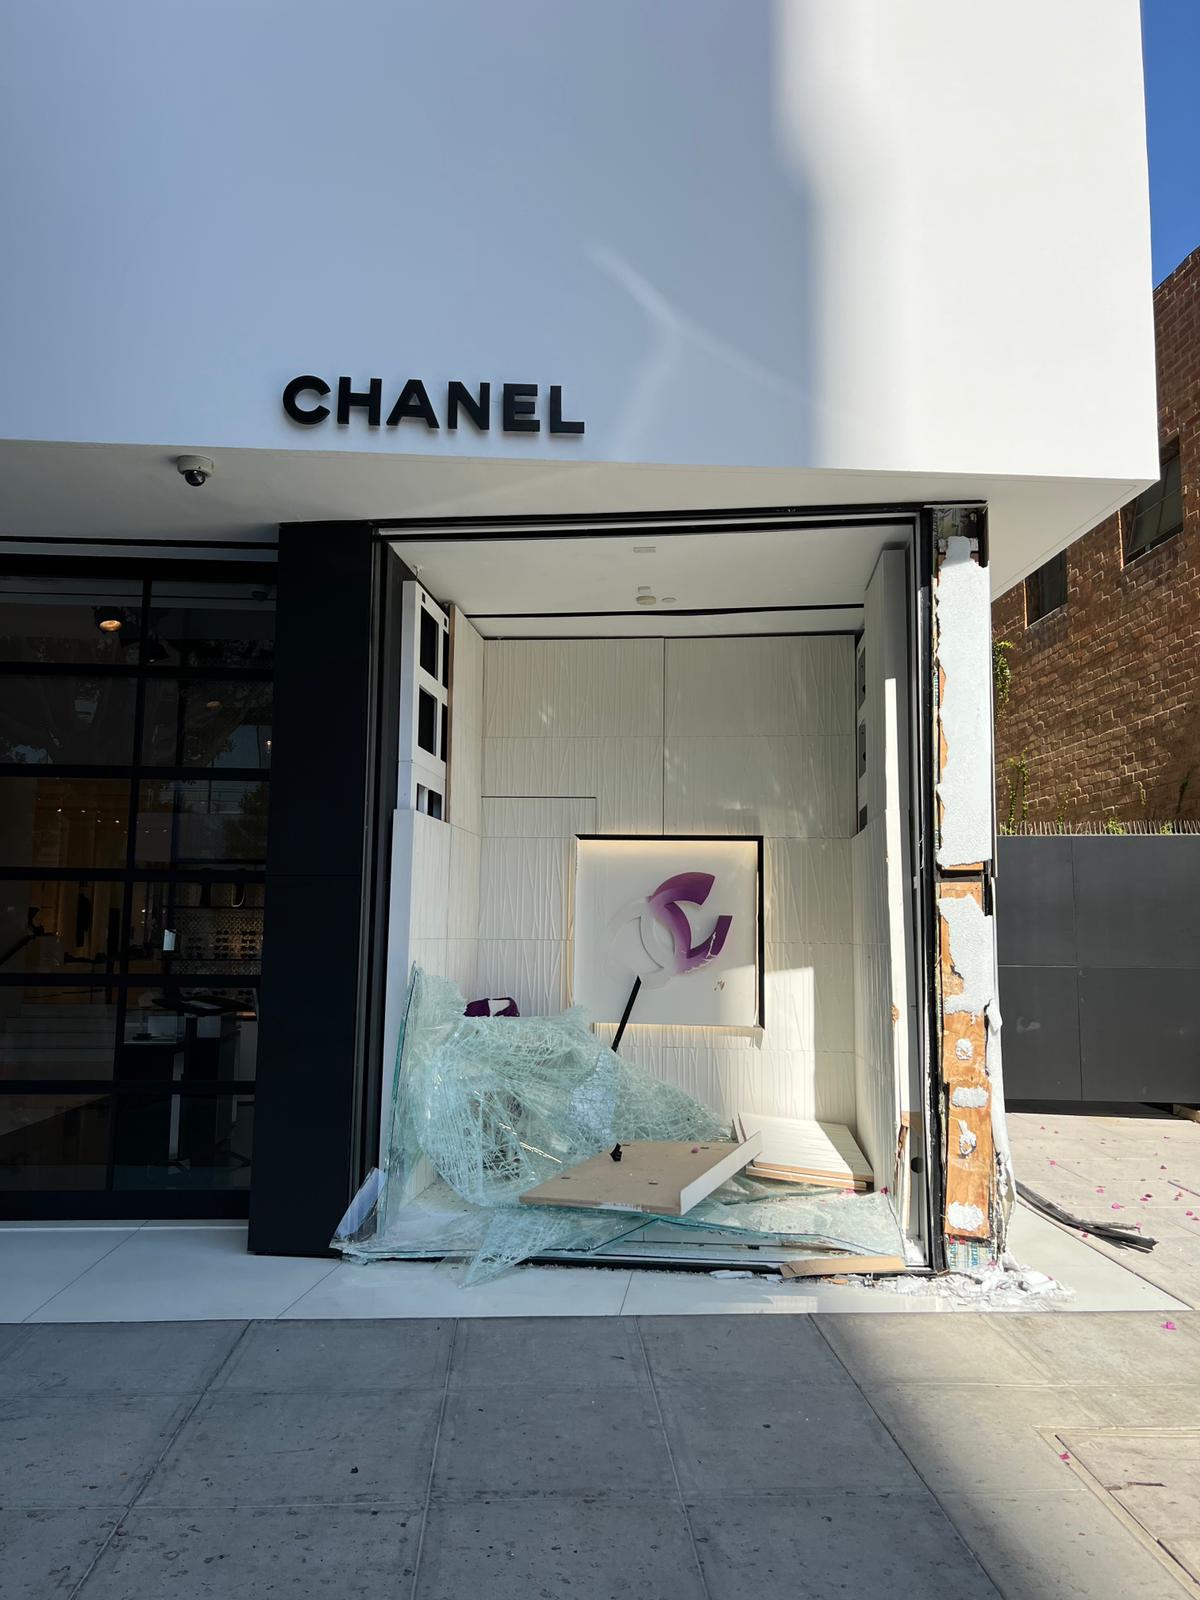 NEWS: Two Chanel Boutiques Target of Smash-and-Grab Robberies in California